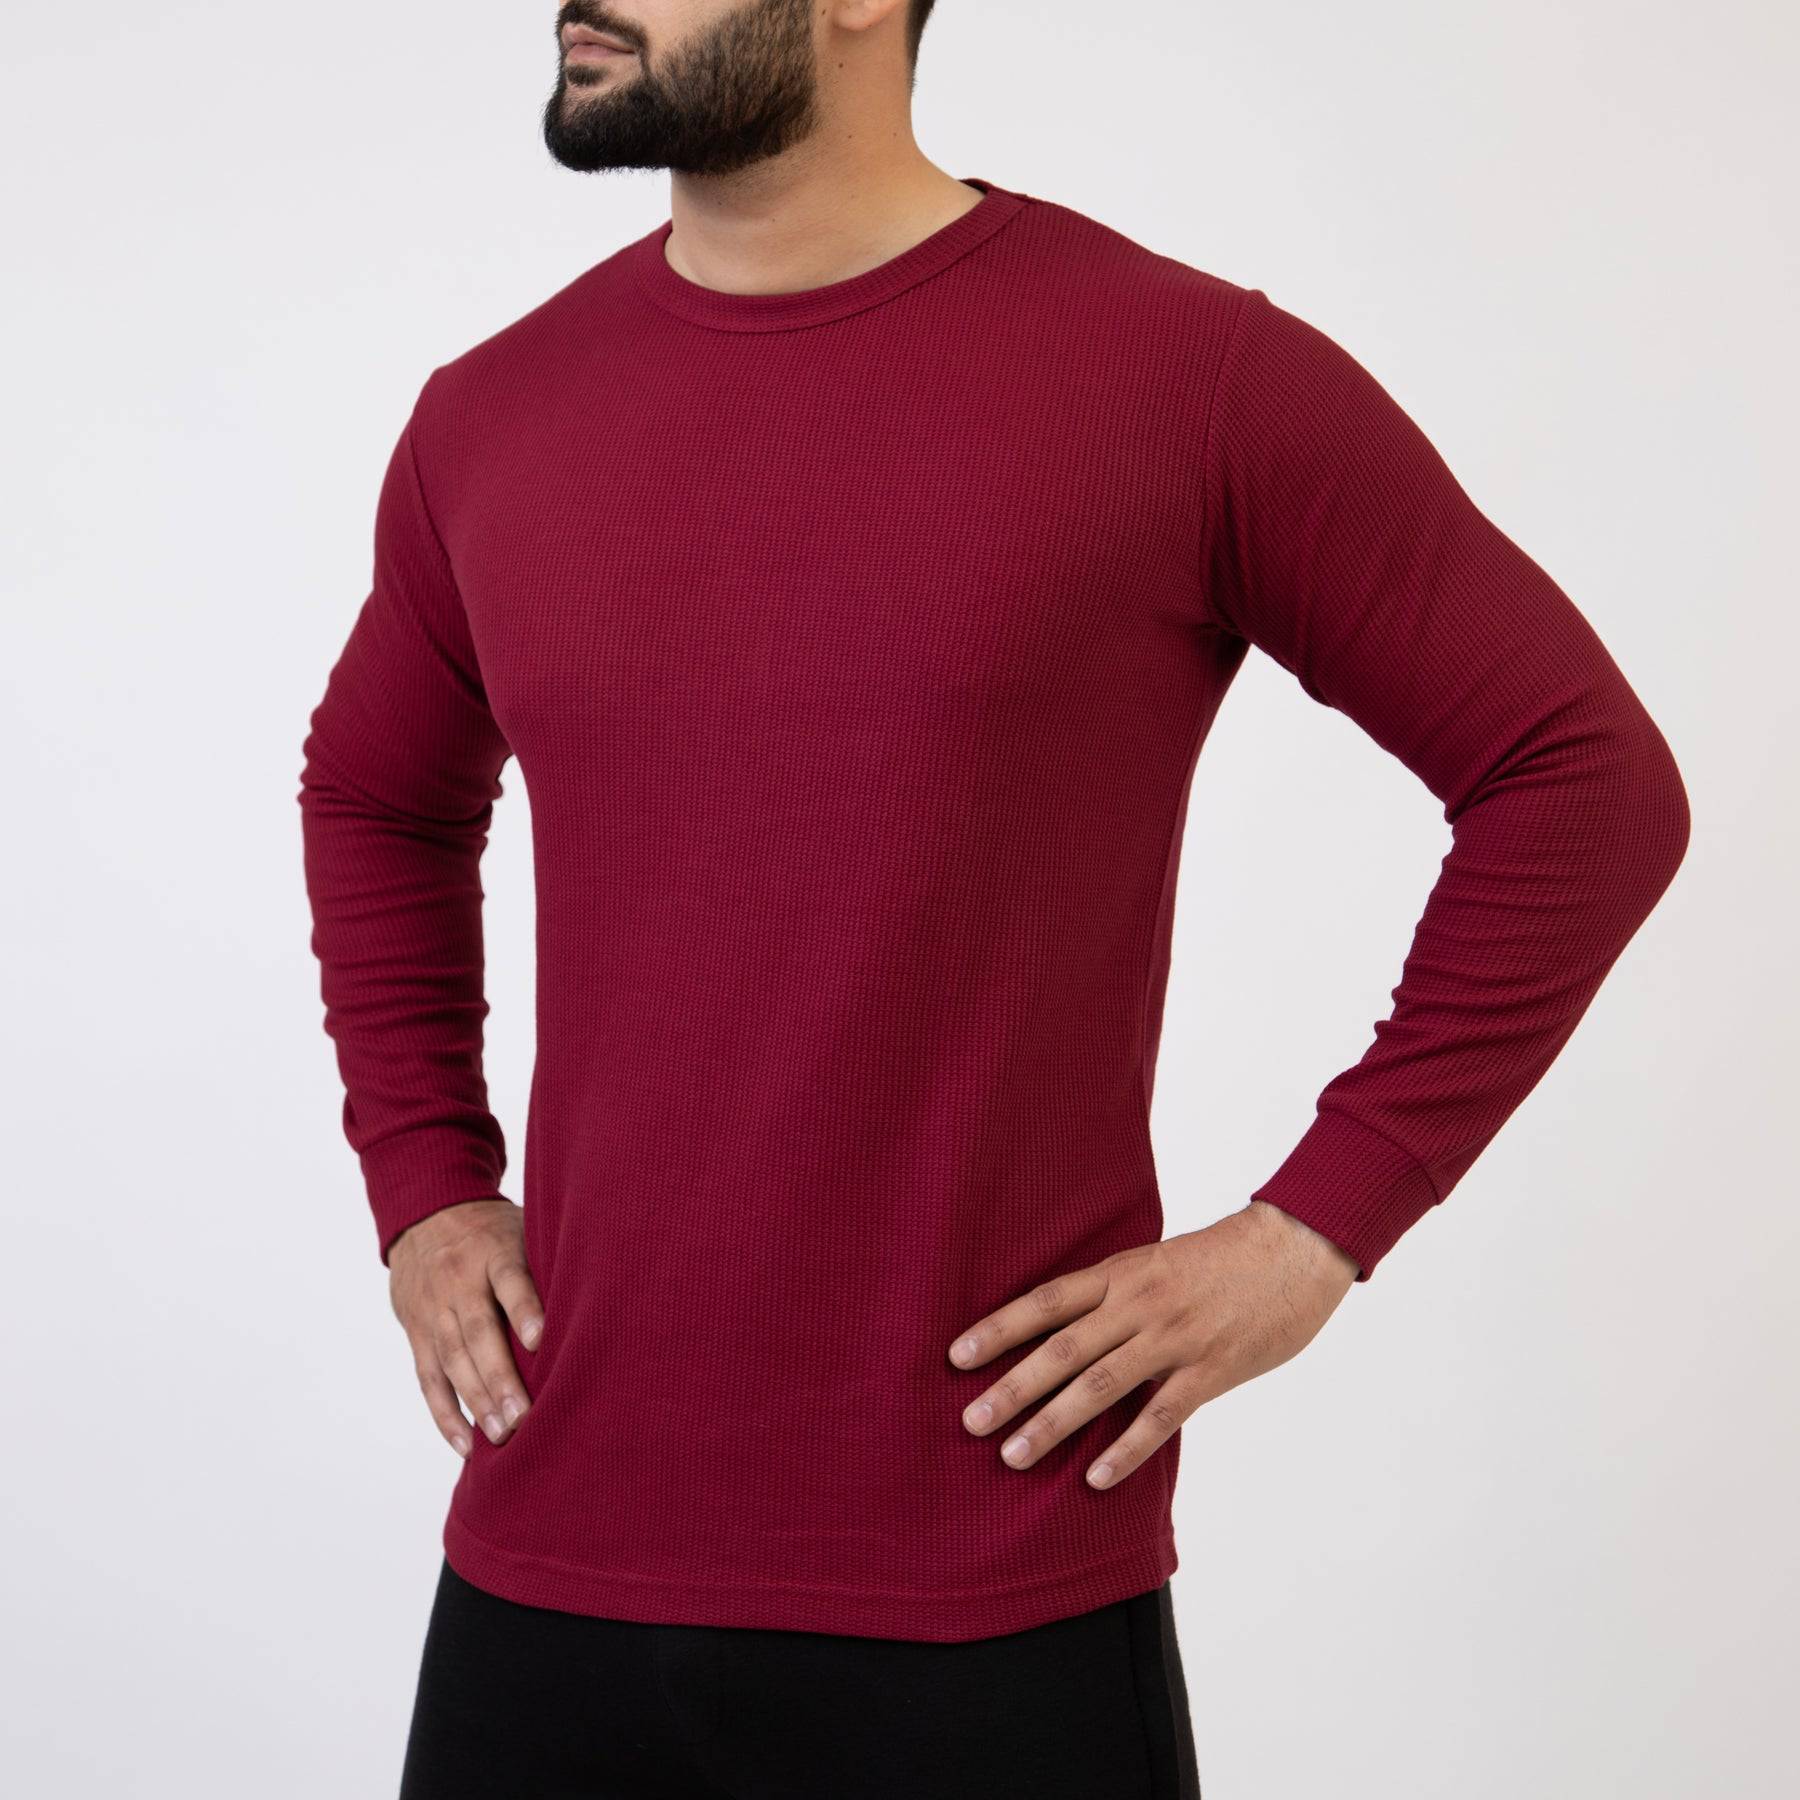 Wine Maroon Thermal Full Sleeves Waffle-Knit - Valetica Sports